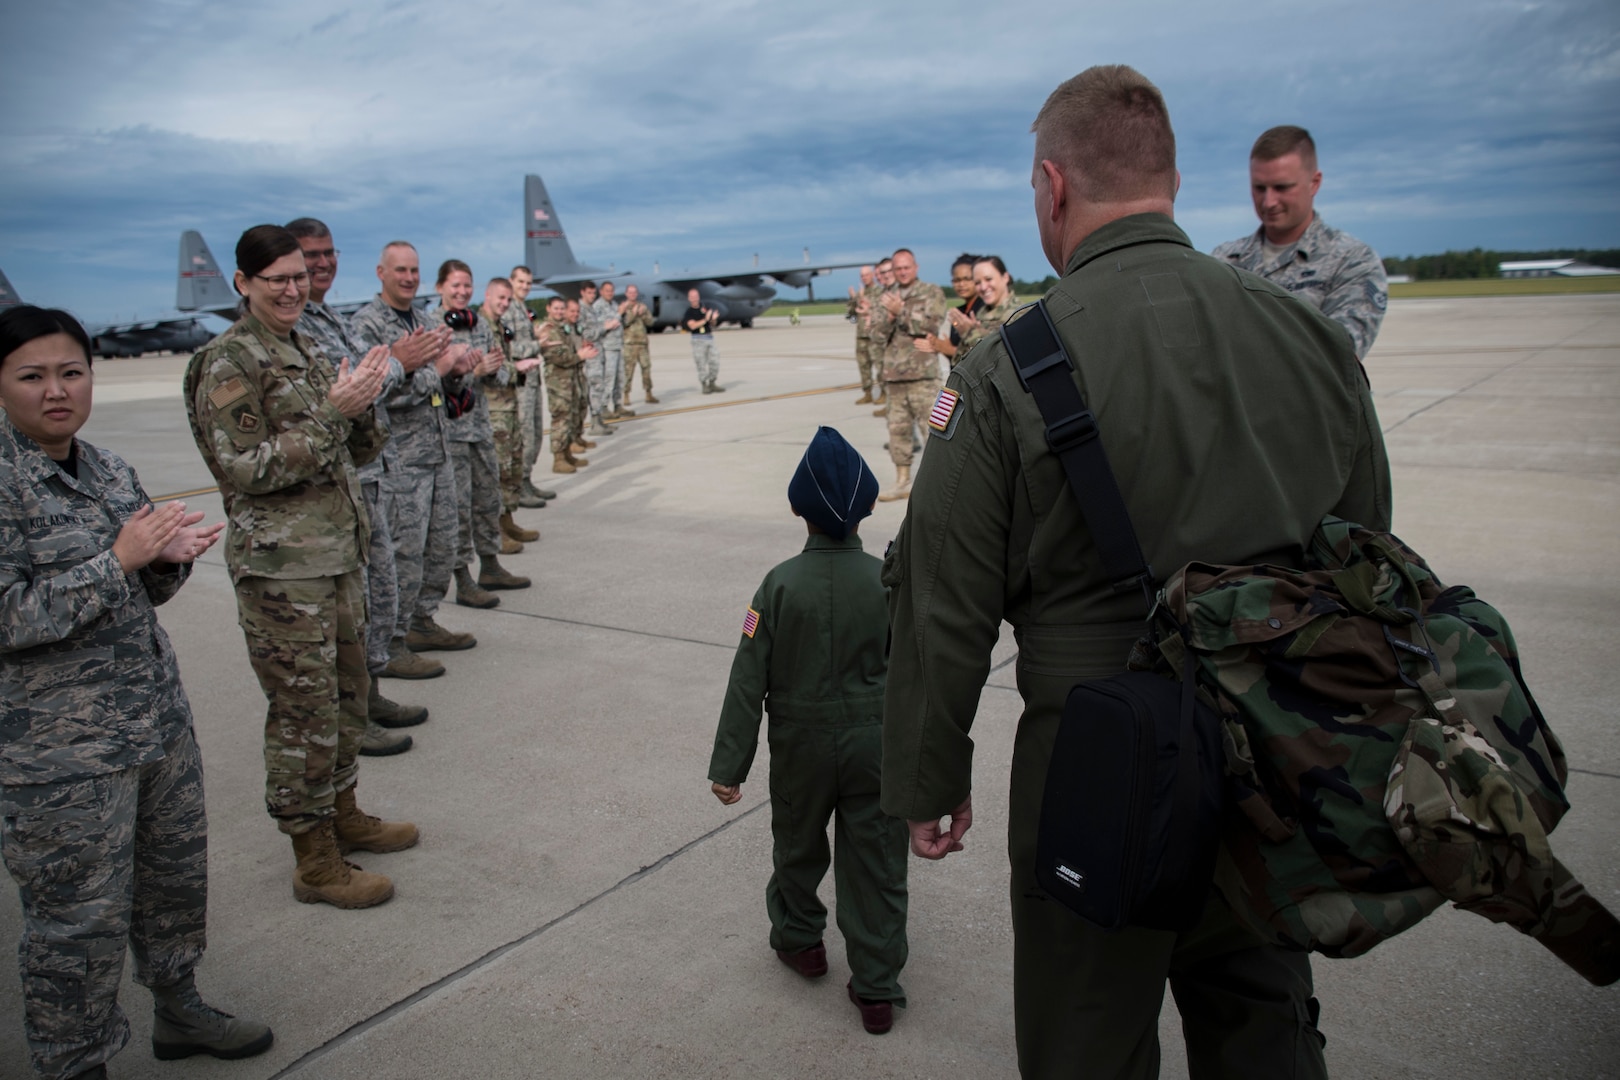 Ayden Houston, 6, walks with aircrew to the flight line after being named honorary "Pilot for a Day" Sept. 15, 2019, at the 179th Airlift Wing, Mansfield, Ohio. The 164th Airlift Squadron collaborated with A Special Wish Foundation of Cleveland to provide Ayden with the unique experience. He has been battling a variety of health issues since birth.